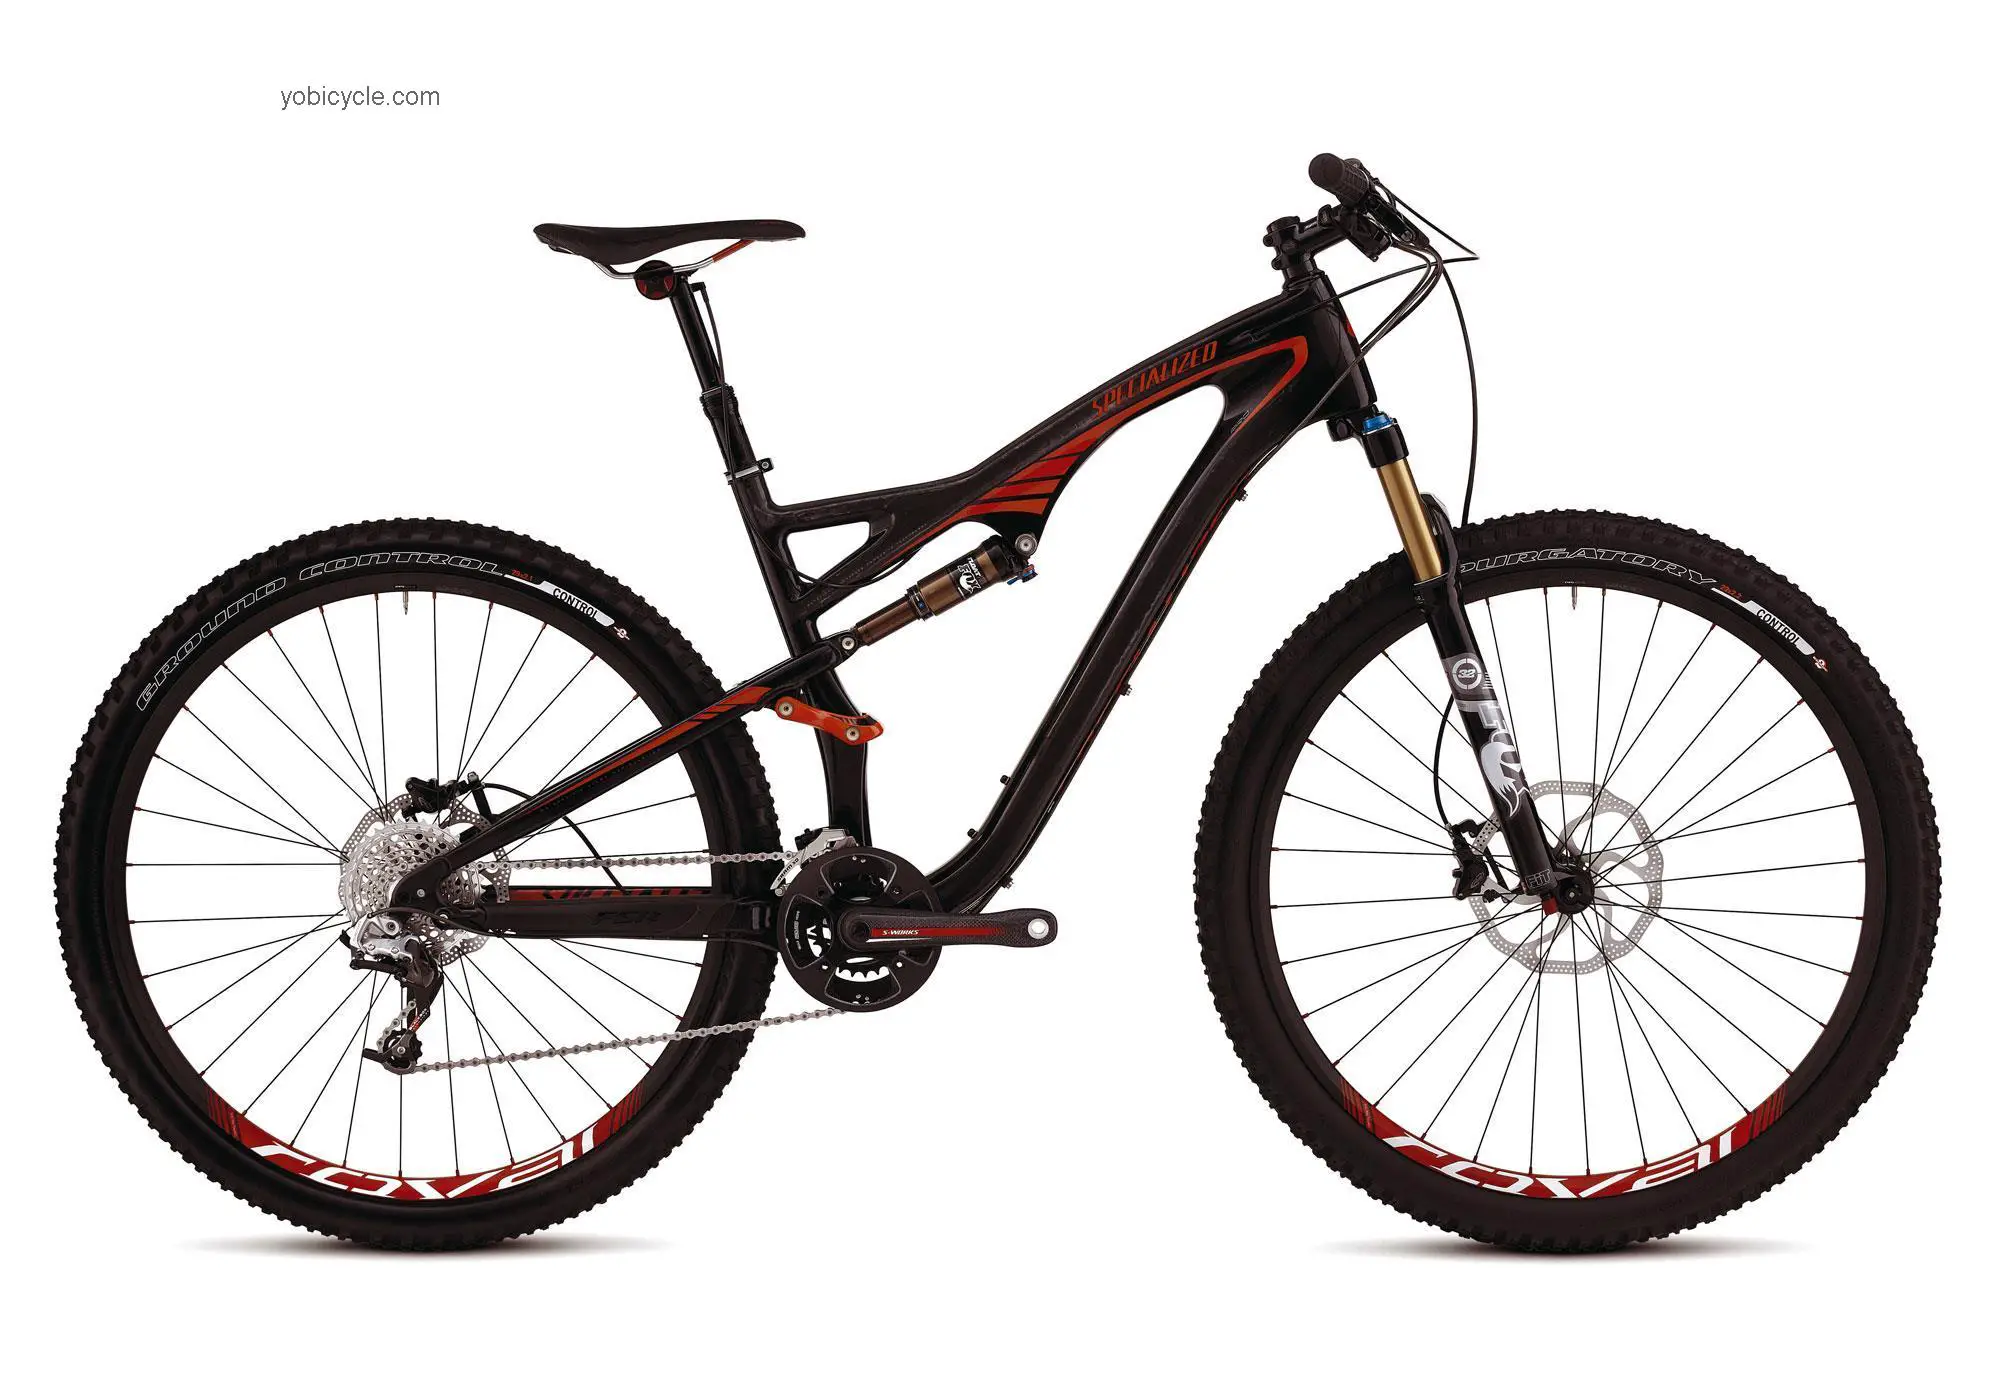 Specialized Camber FSR Pro Carbon 29 2012 comparison online with competitors